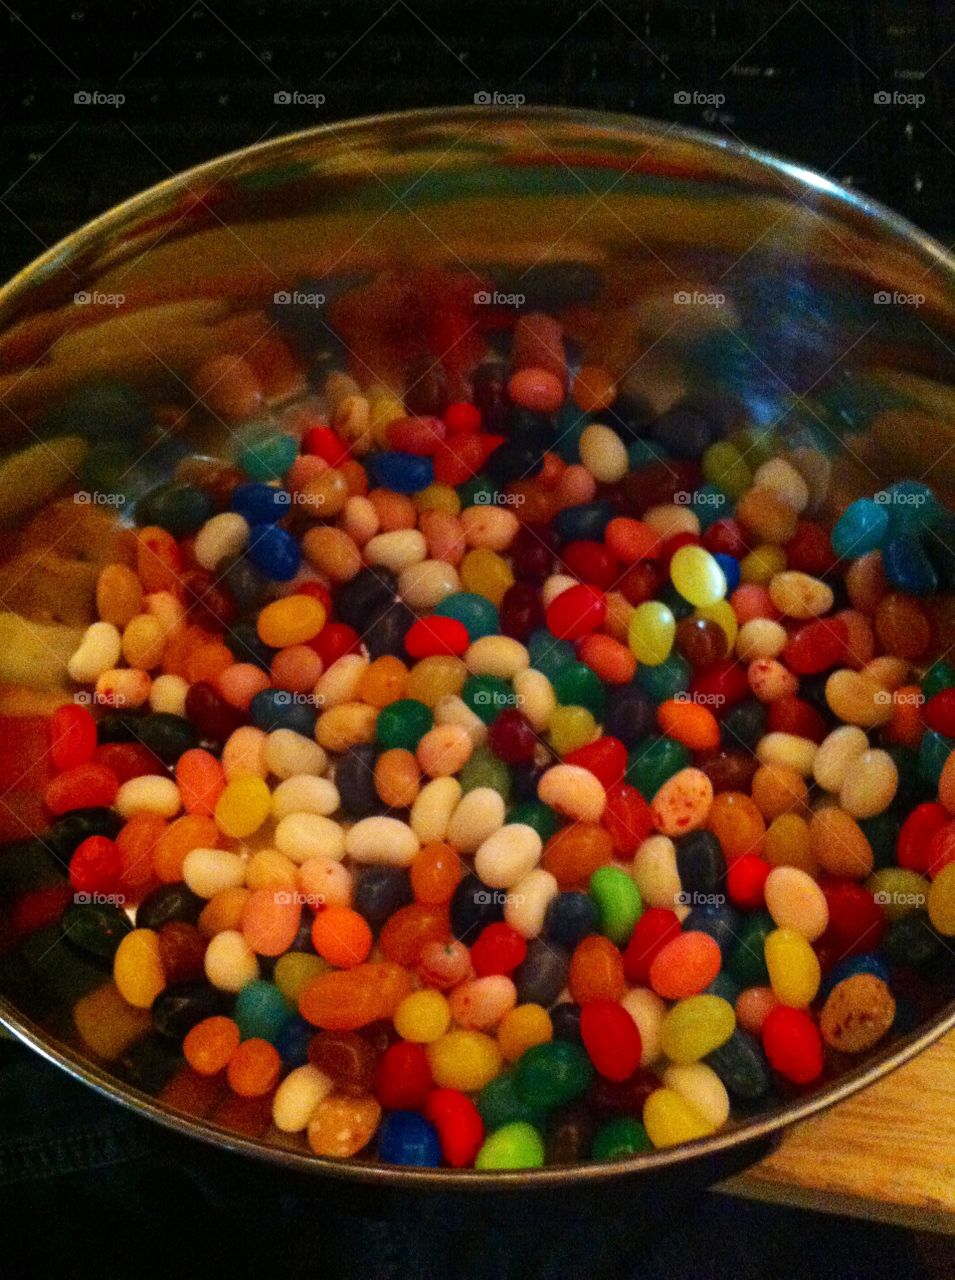 Jelly Beans in a Bowl 